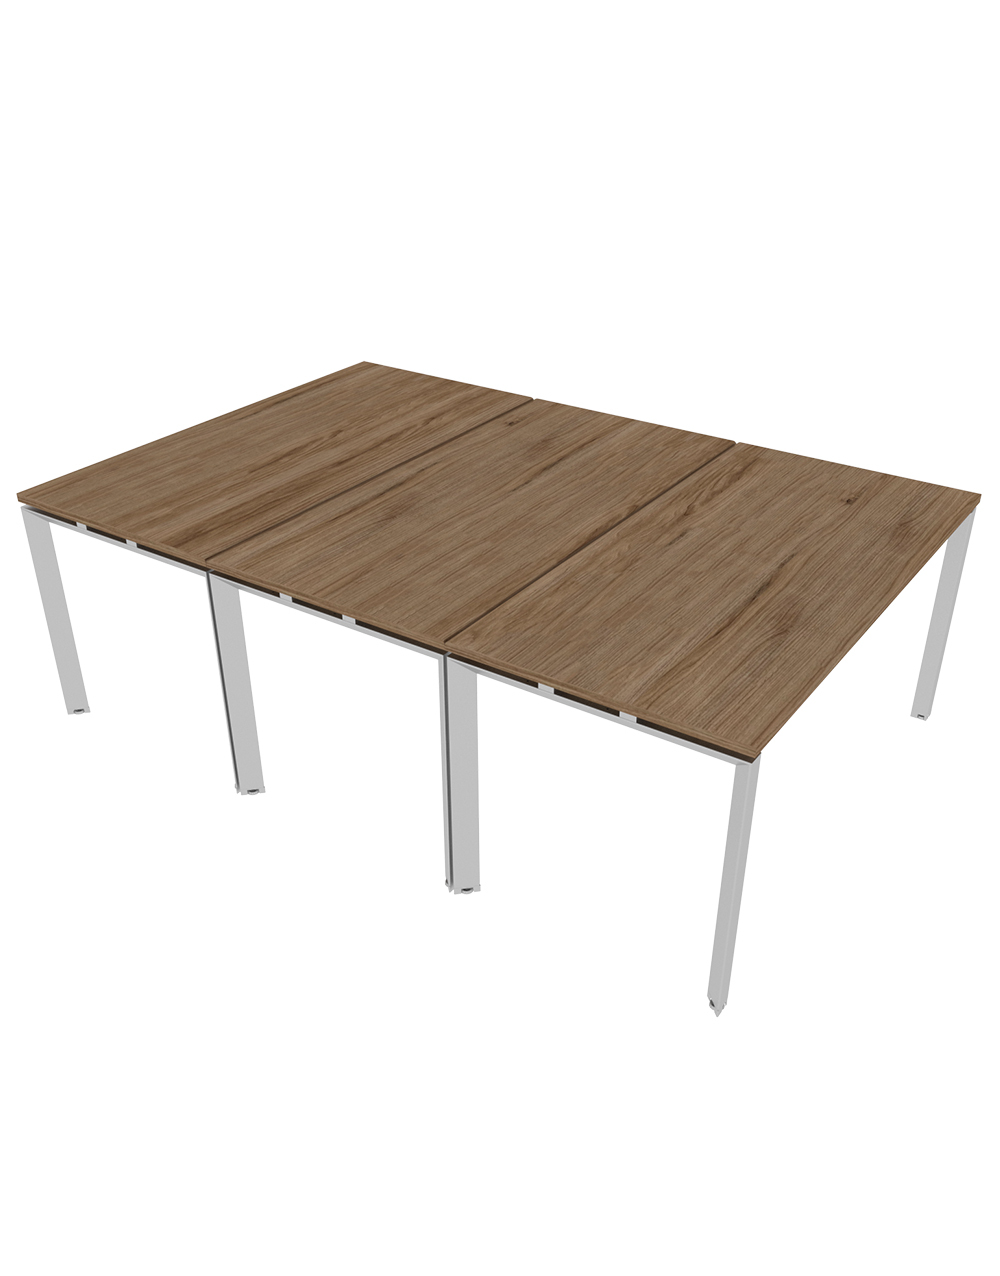 Inspire 3 Tables